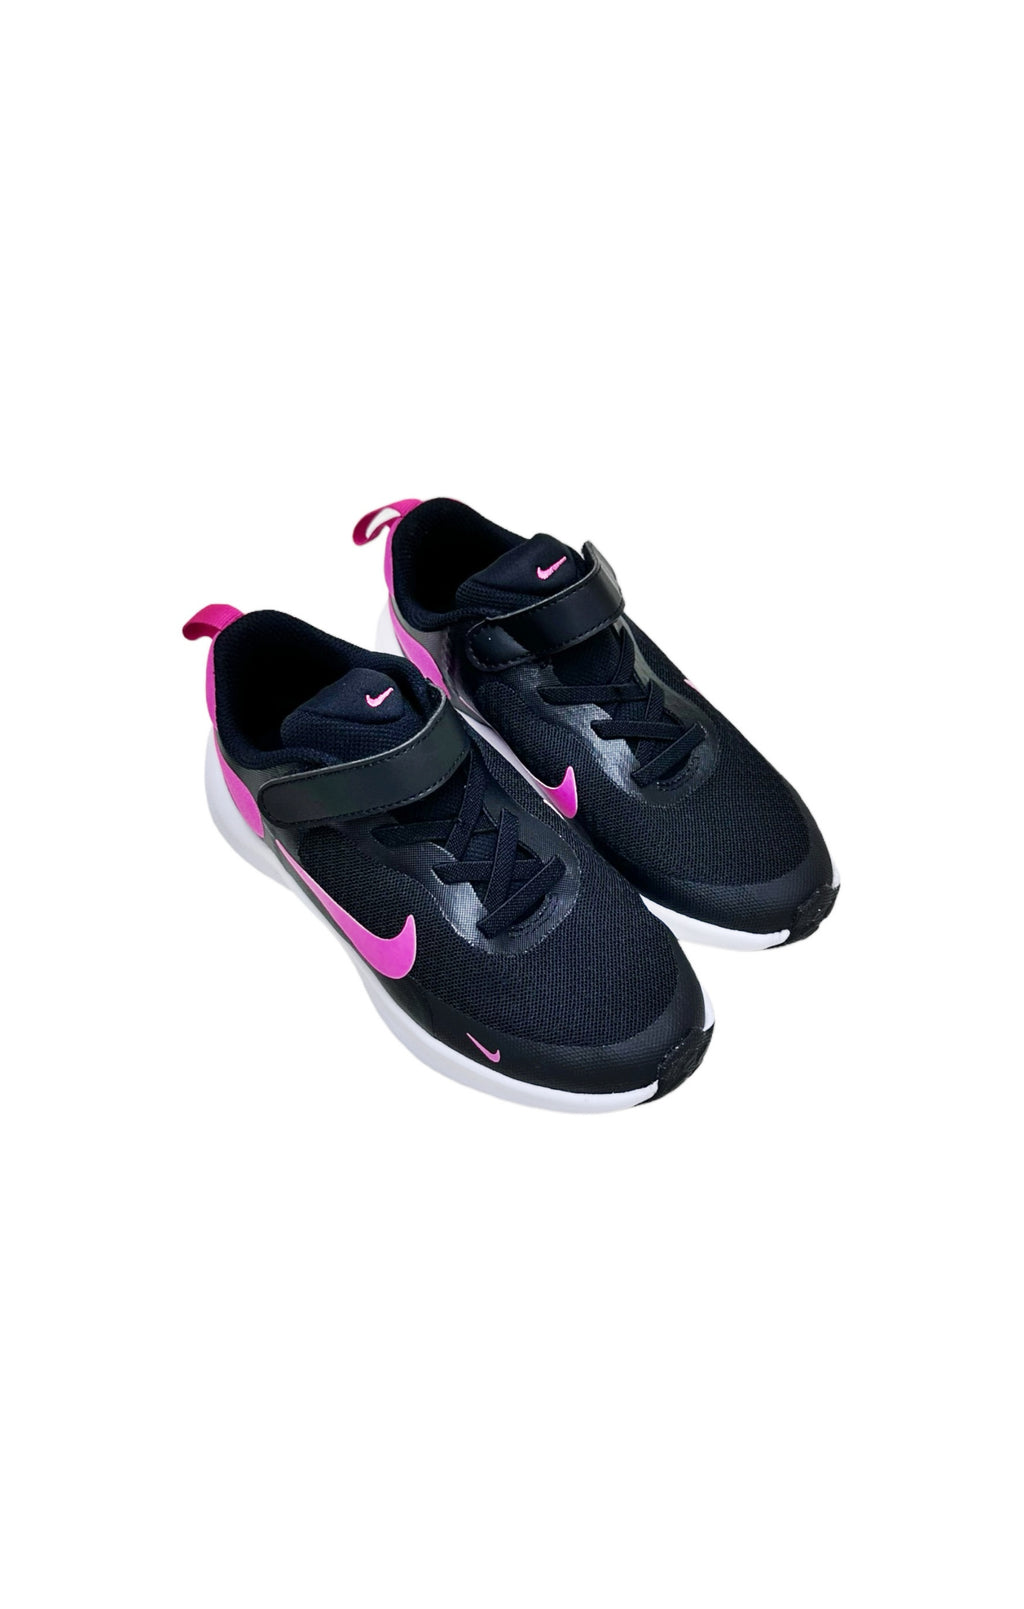 NIKE (NEW) Sneakers Size: Toddler US 12.5C